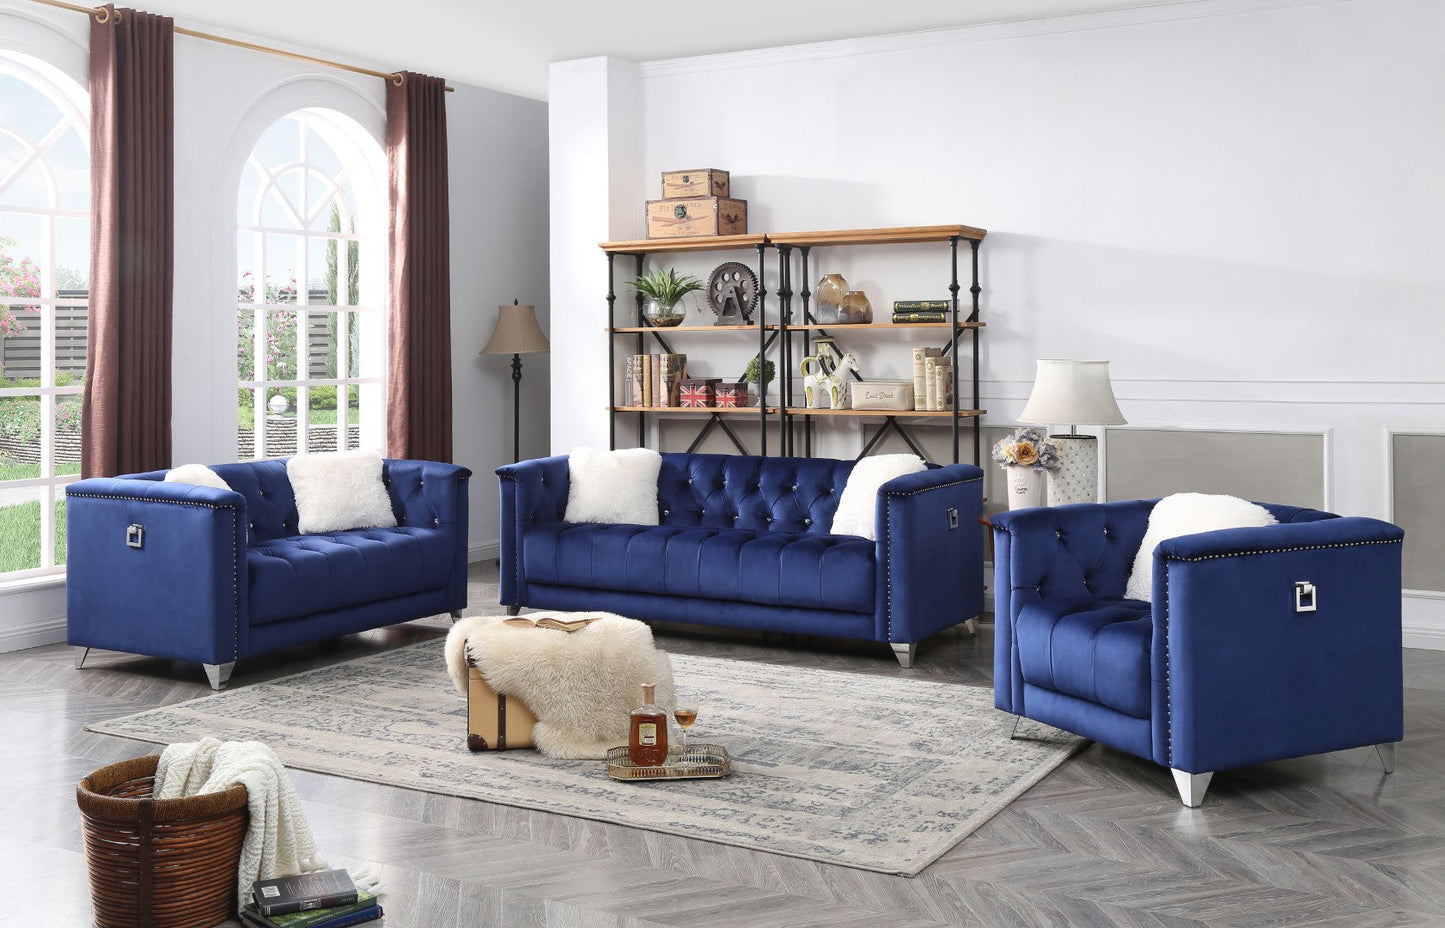 Galaxy Home Russell Tufted Upholstery 2 Piece Living Room Set Finished Velvet Fabric in Blue Velvet